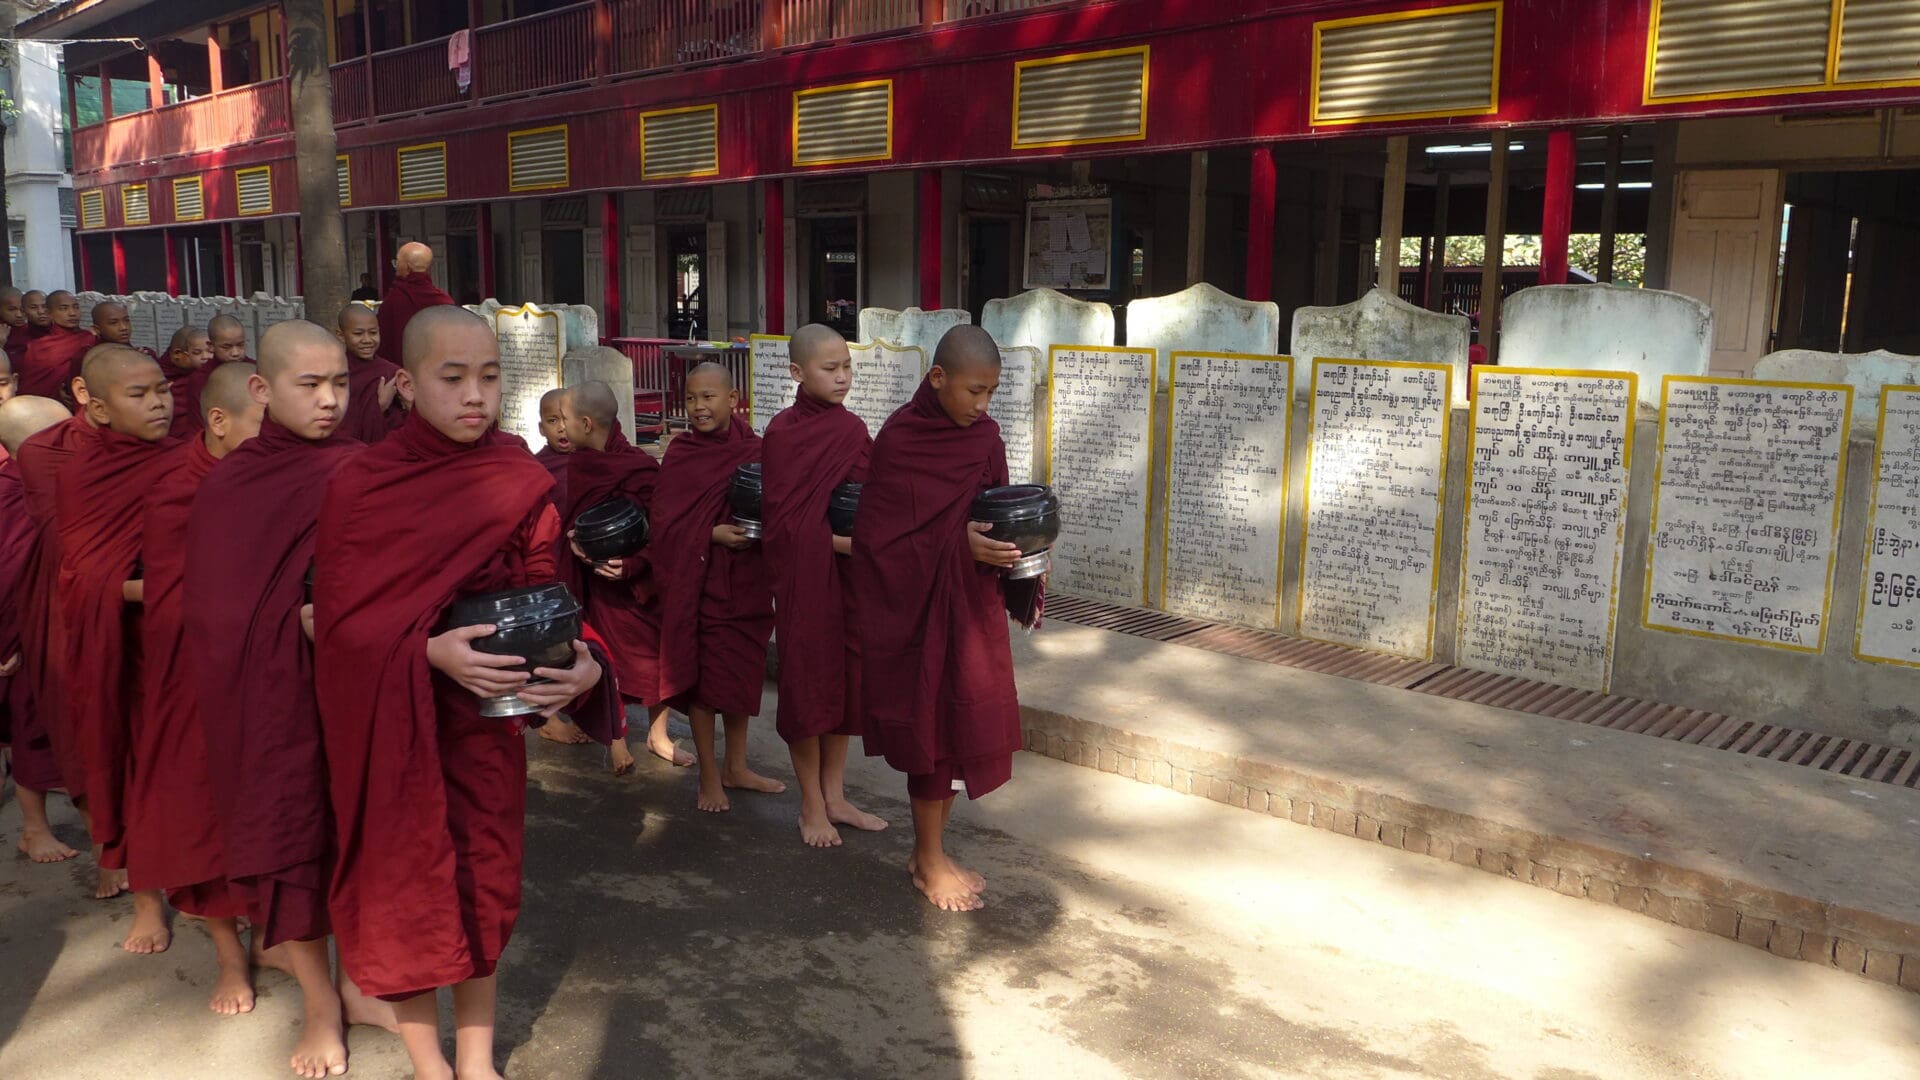 A group of young monks in red robes holding black objects.